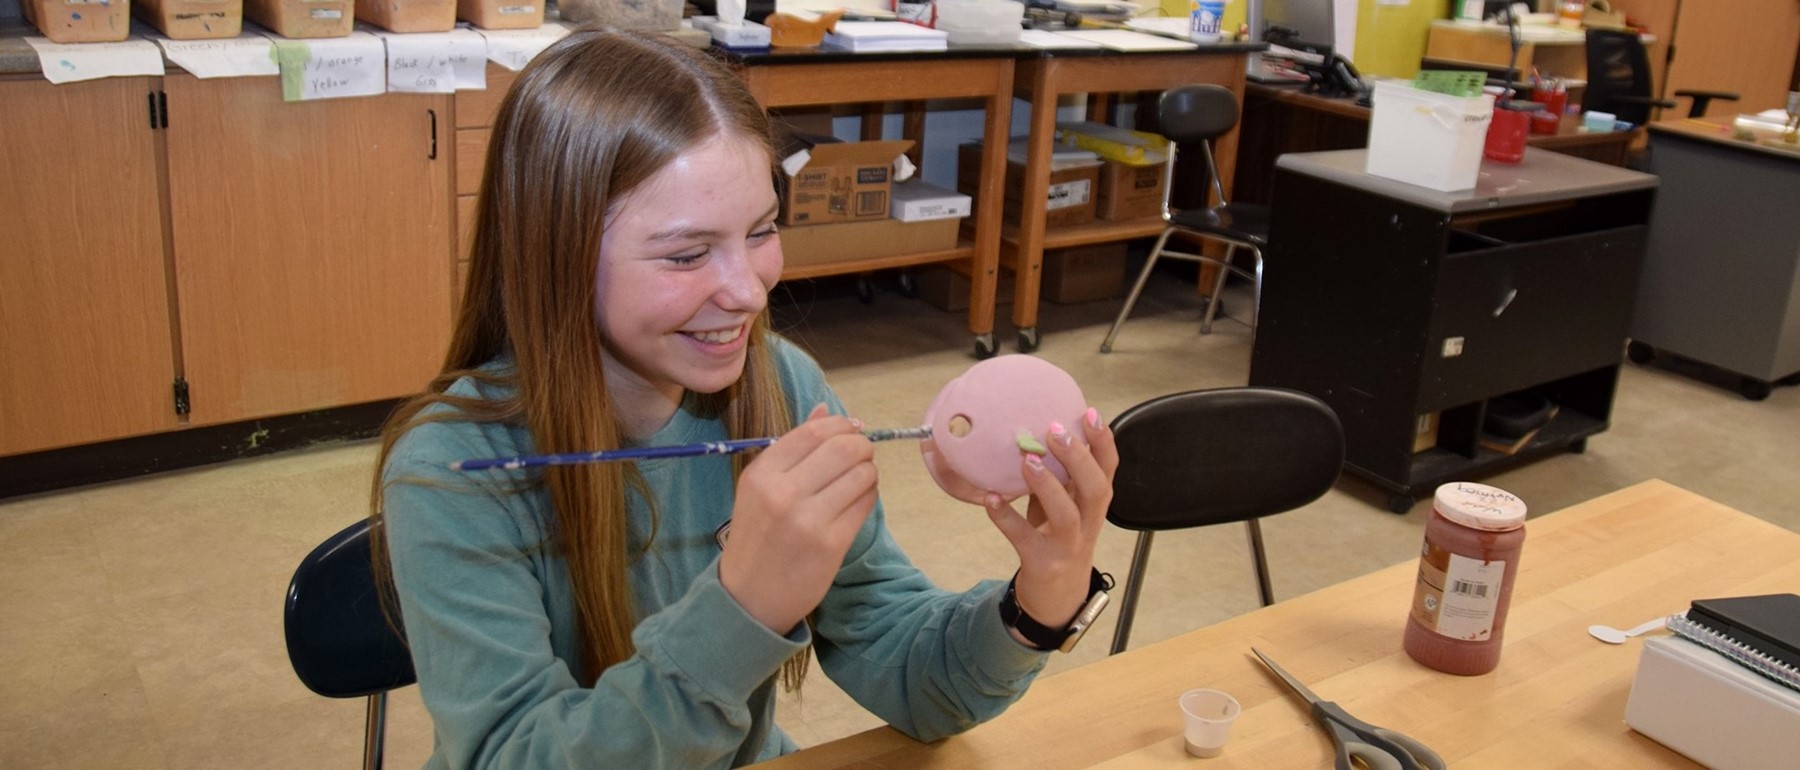 A Vestal Middle School eighth-grade student paints a ceramic project in art class.